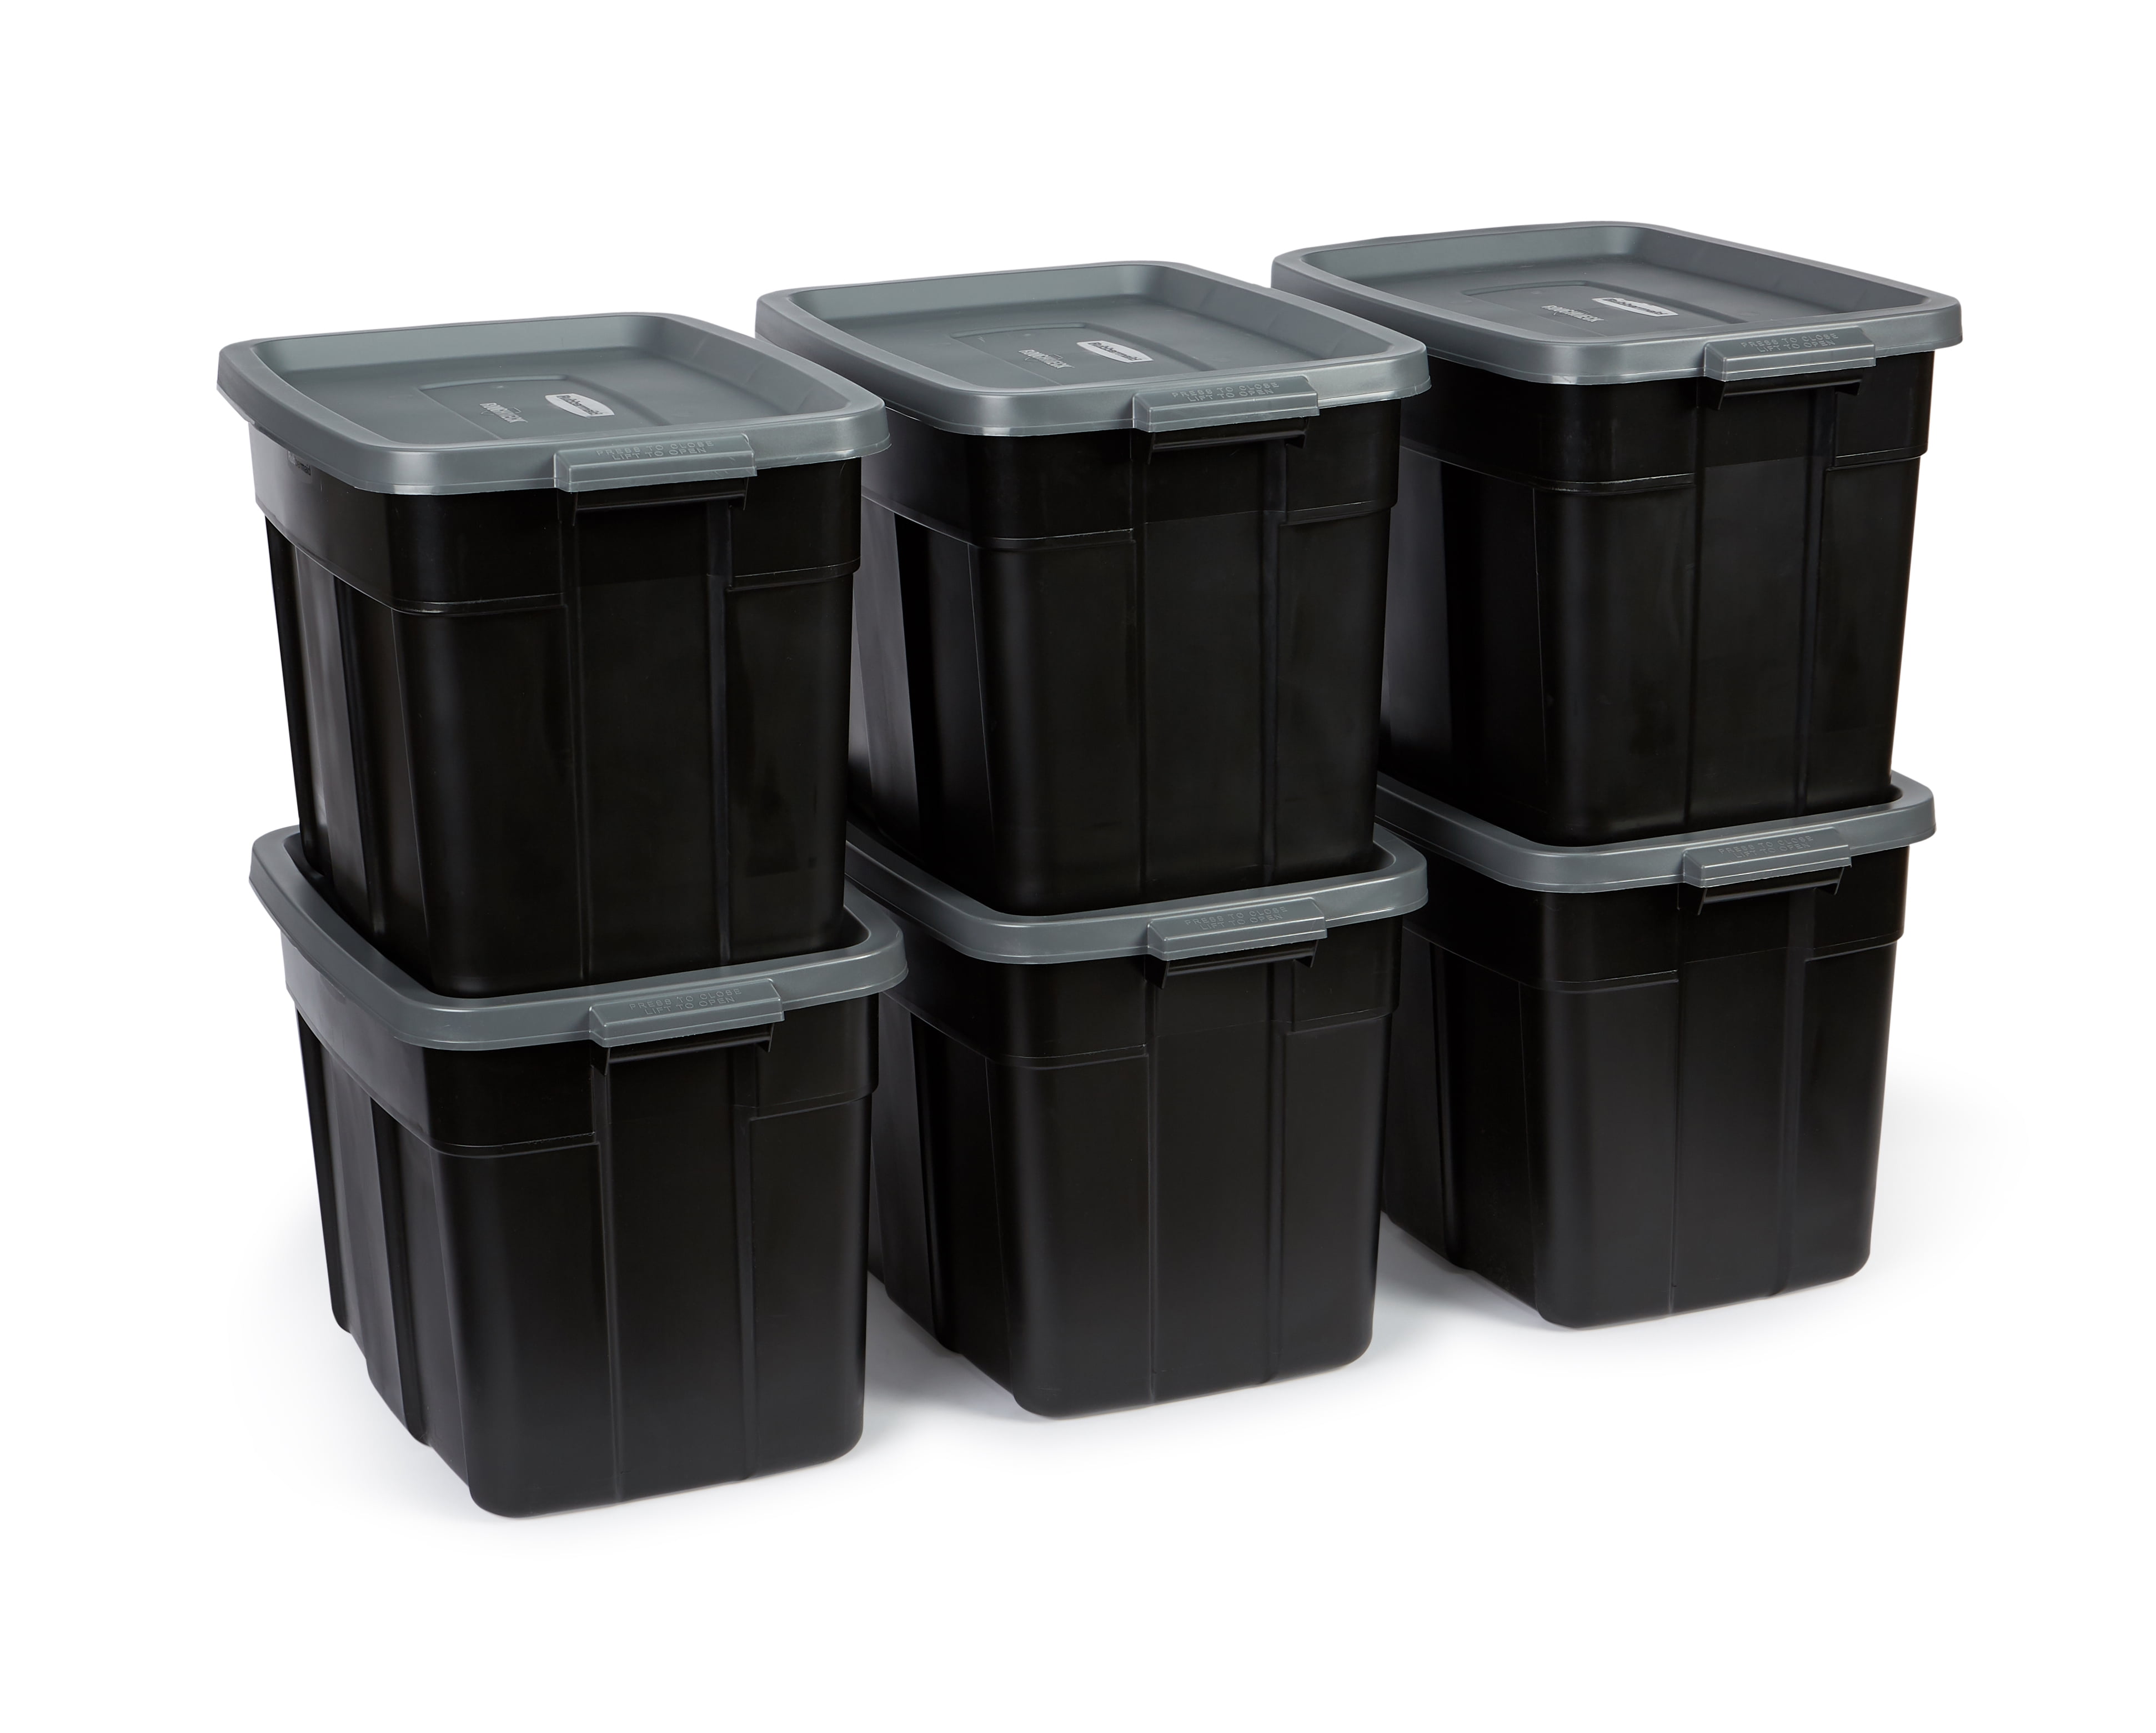 Rubbermaid Roughneck Tote 18 Gallon Storage Container, Heritage Blue (6 Pack)